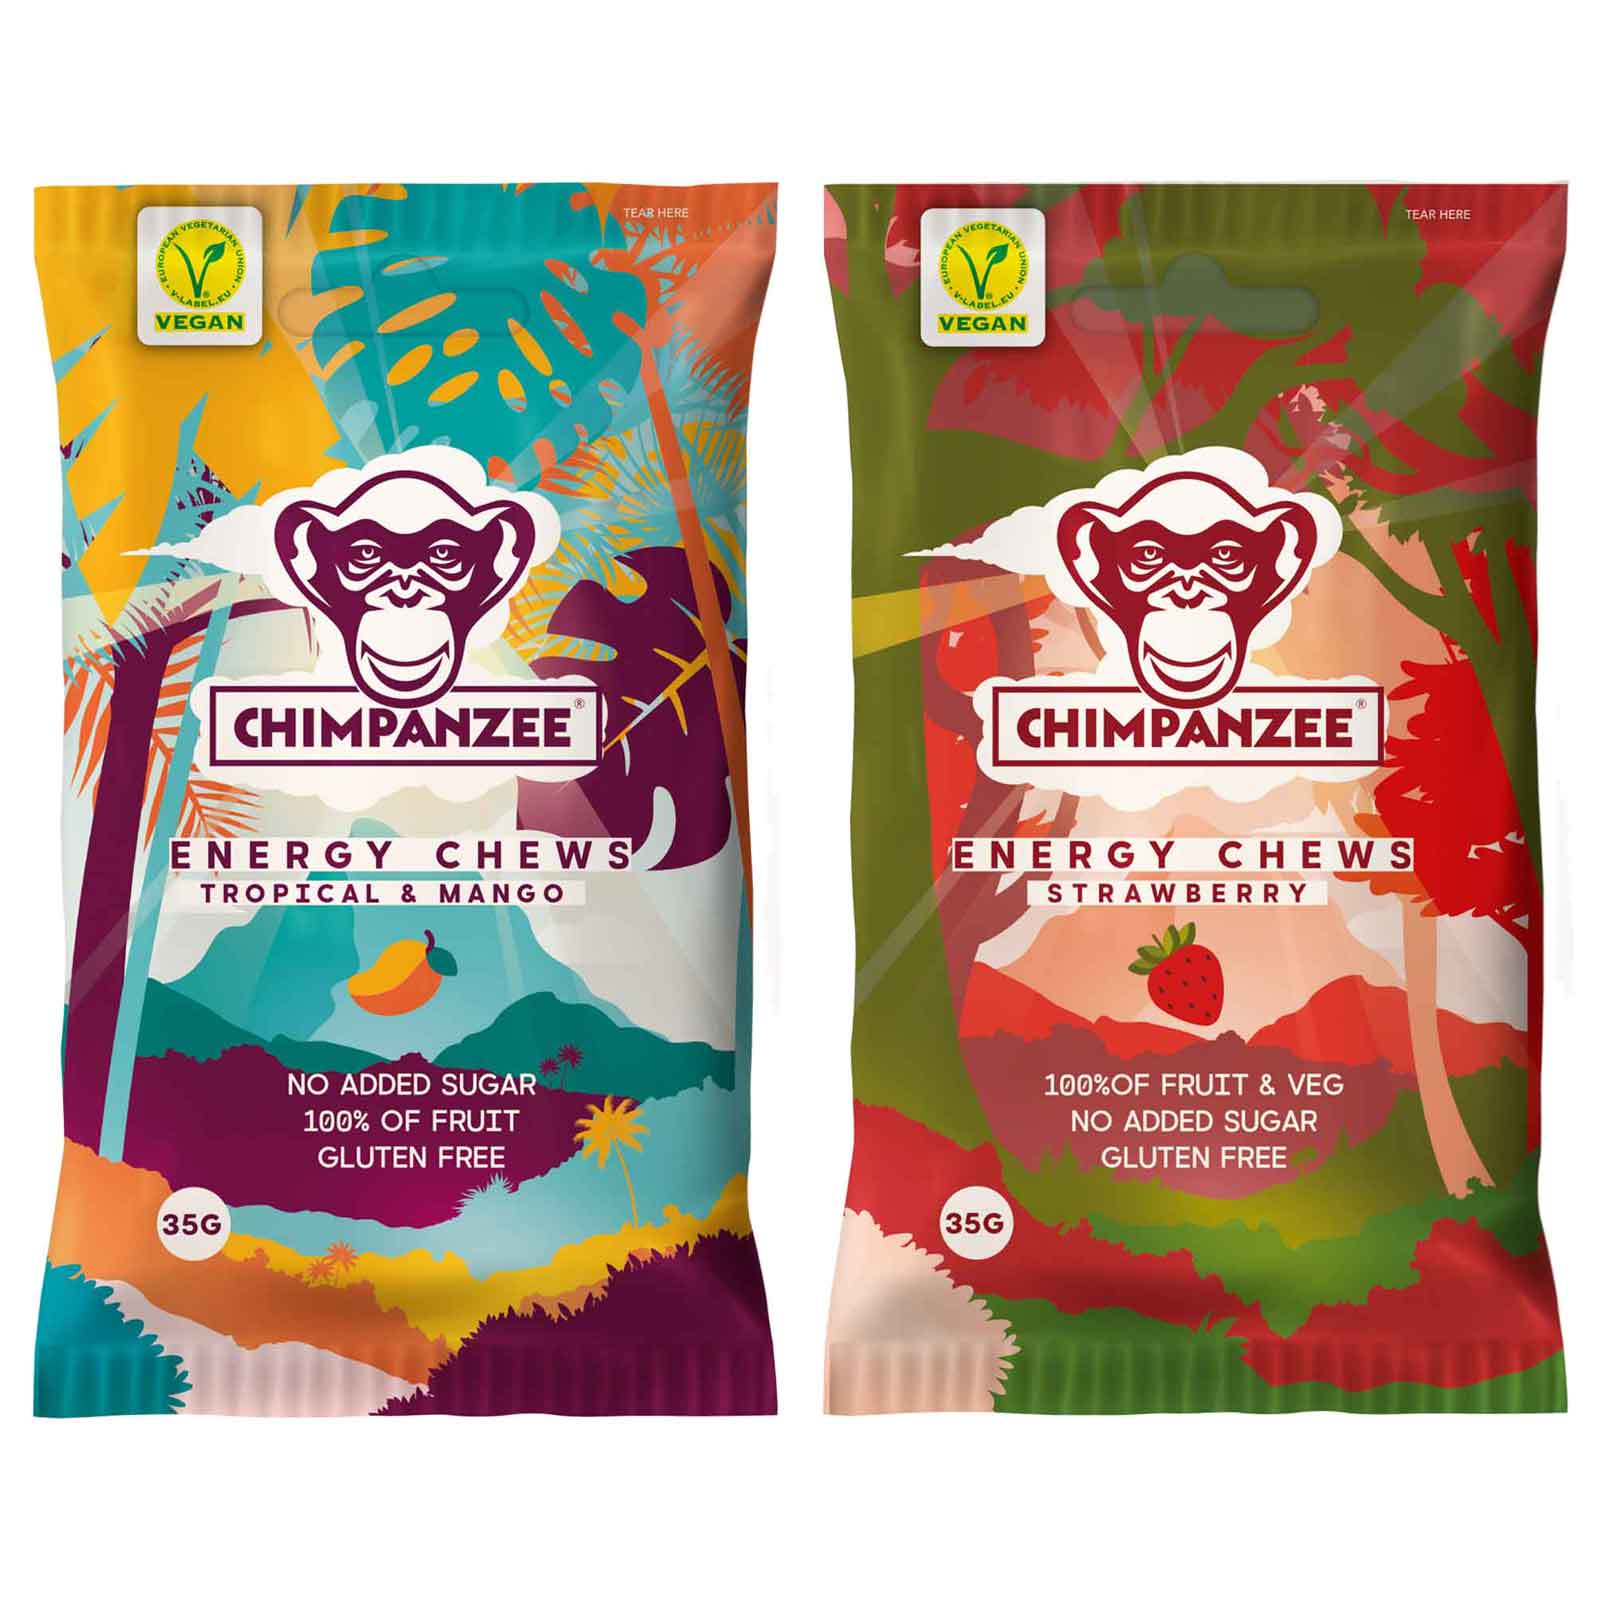 Image of Chimpanzee Energy Chews with Carbohydrates - 35g